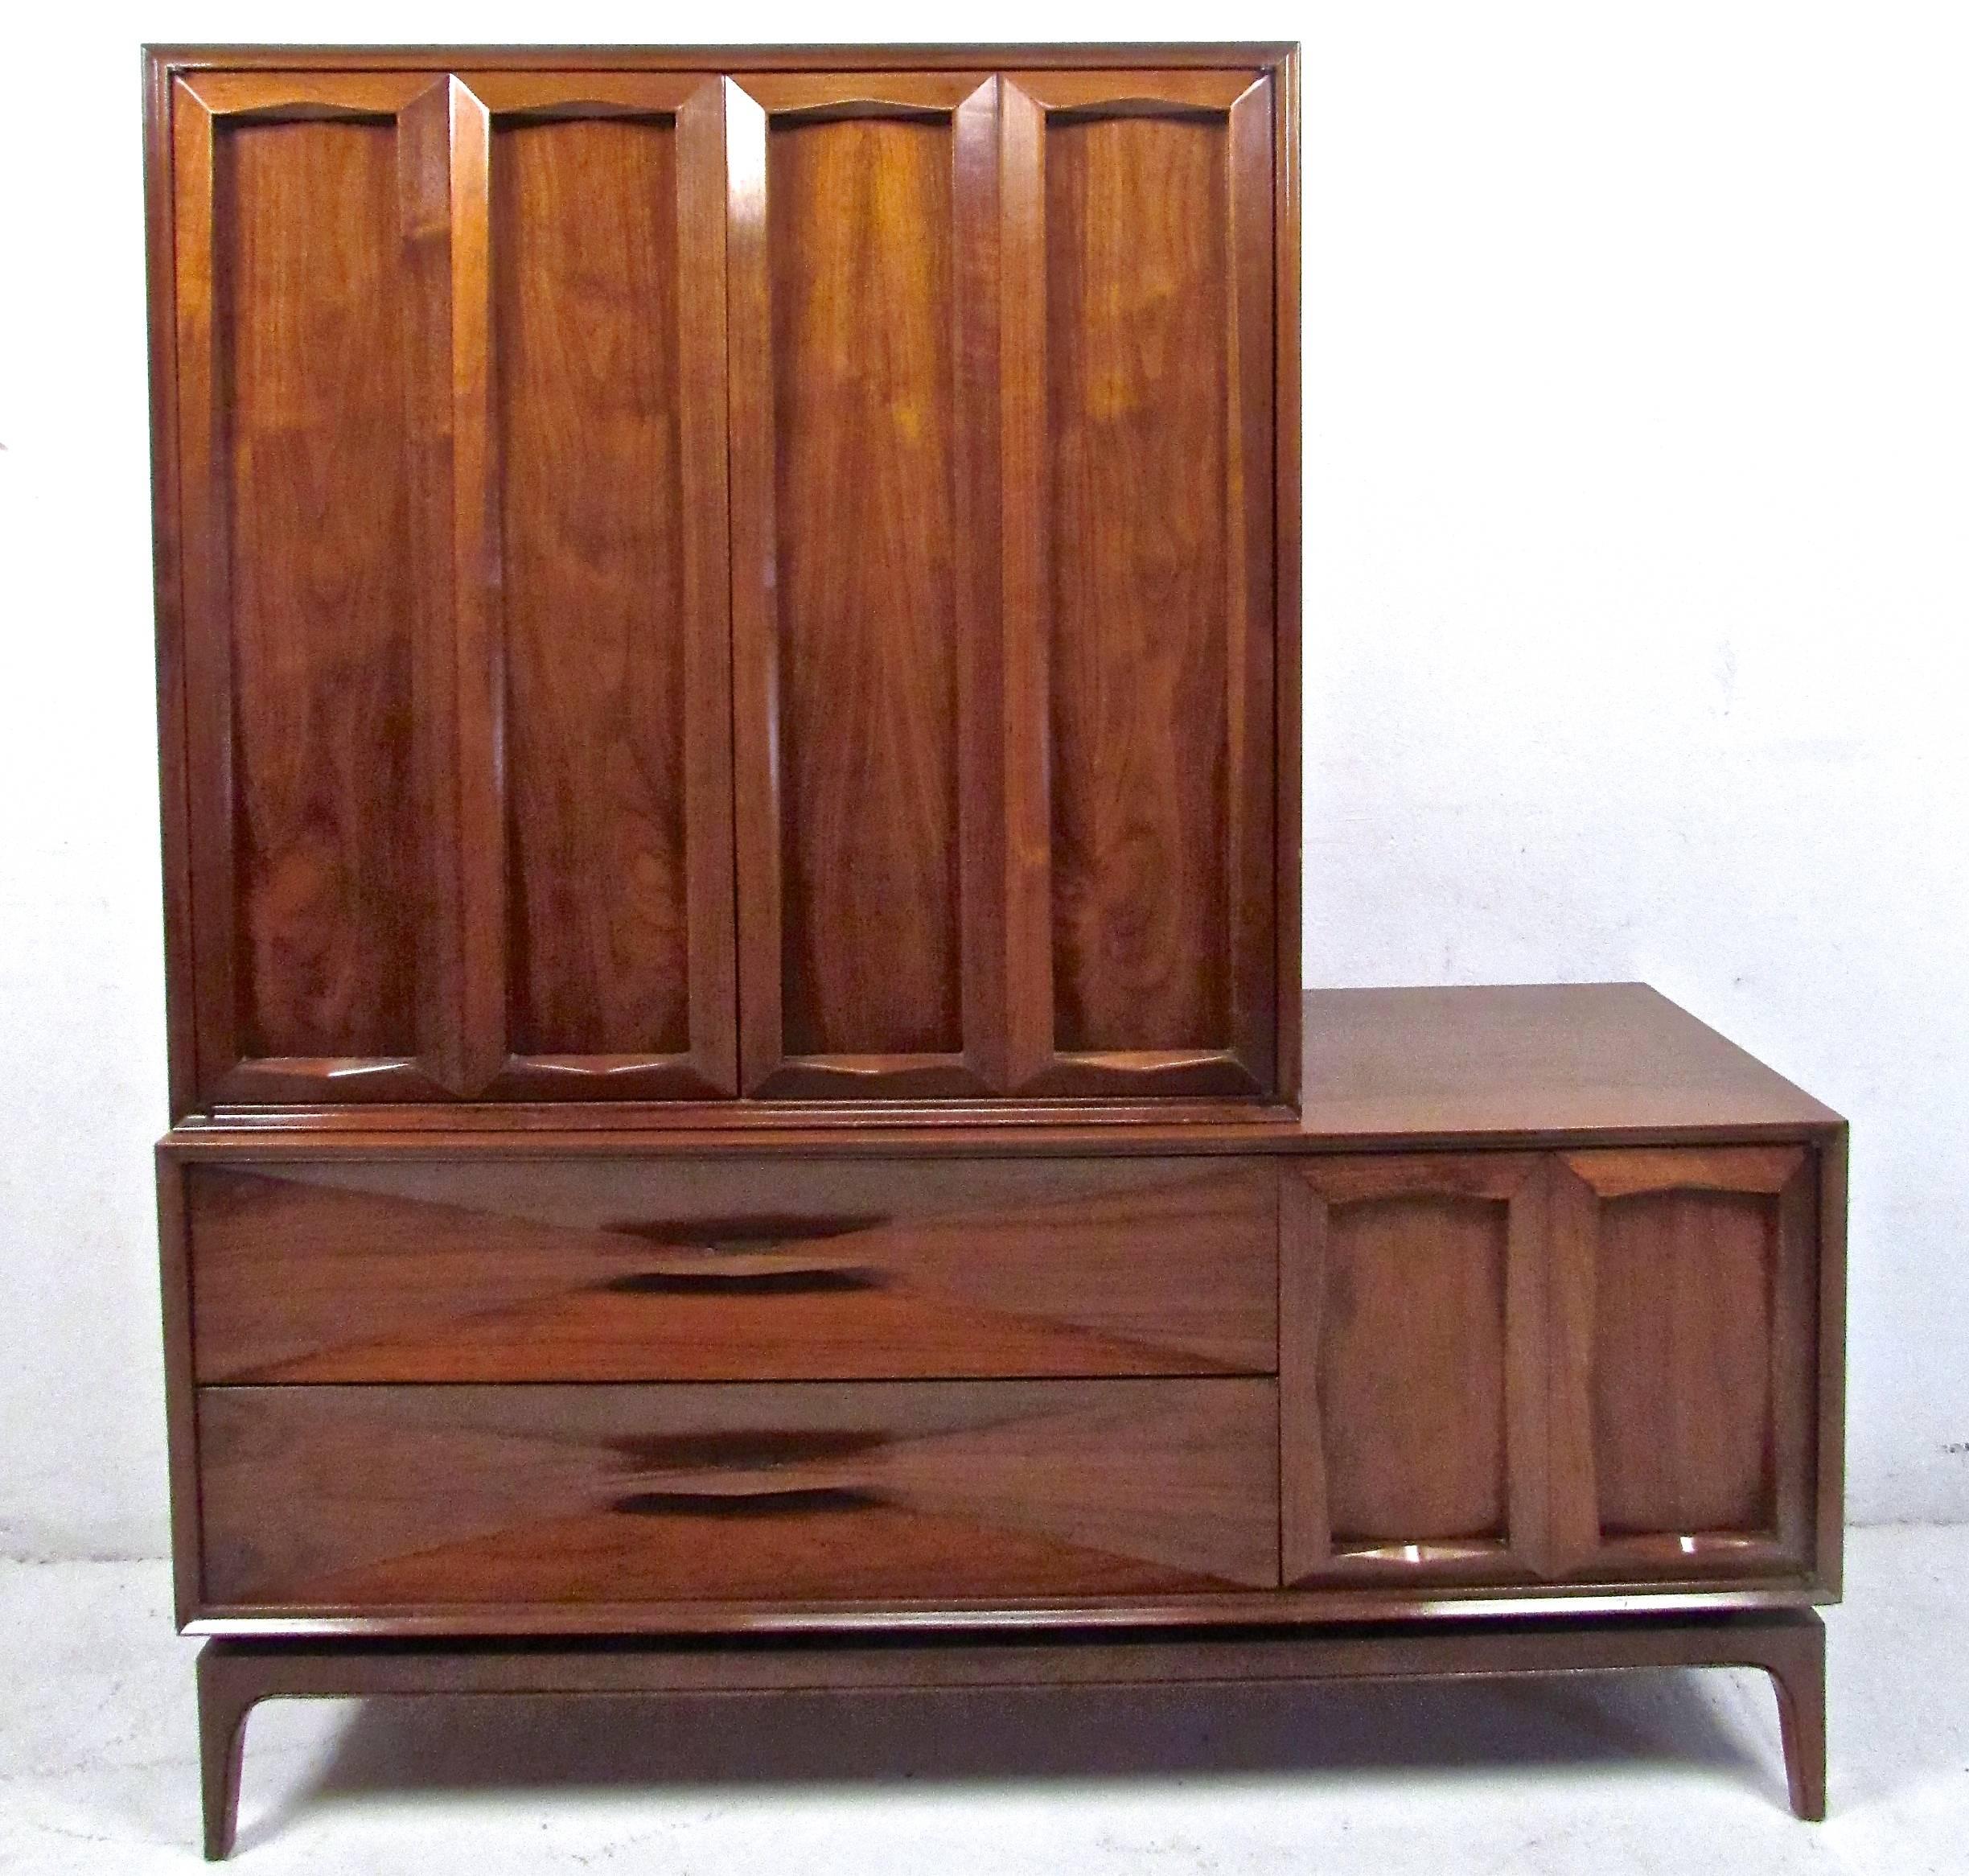 This stunning vintage walnut dresser features uniquely angled drawer fronts, tapered legs, and unique pulls. The upper cabinet features three drawers plus vertical split shelves for organization and storage. Please confirm item location (NY or NJ).